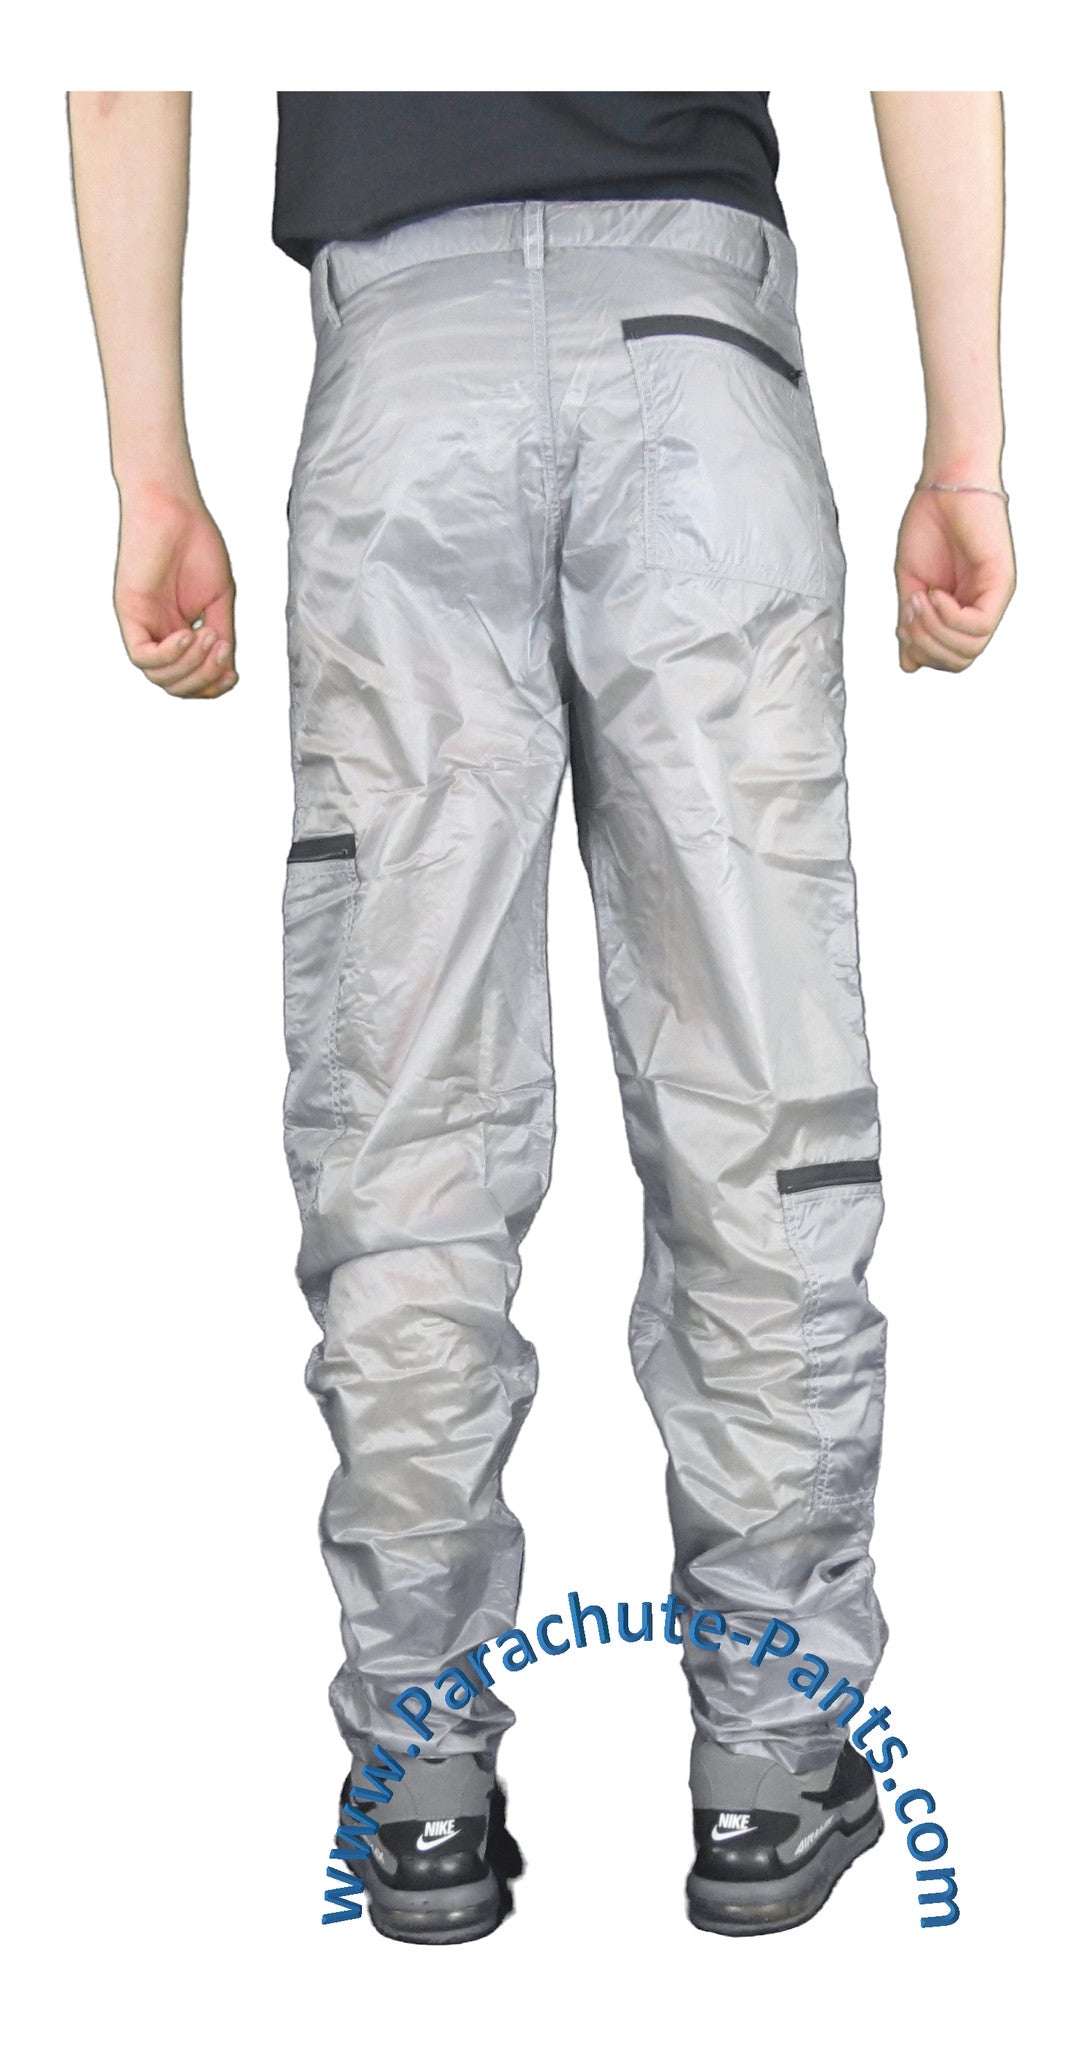 Panno D'Or Silver Thin Nylon Parachute Pants with Black Zippers | The ...